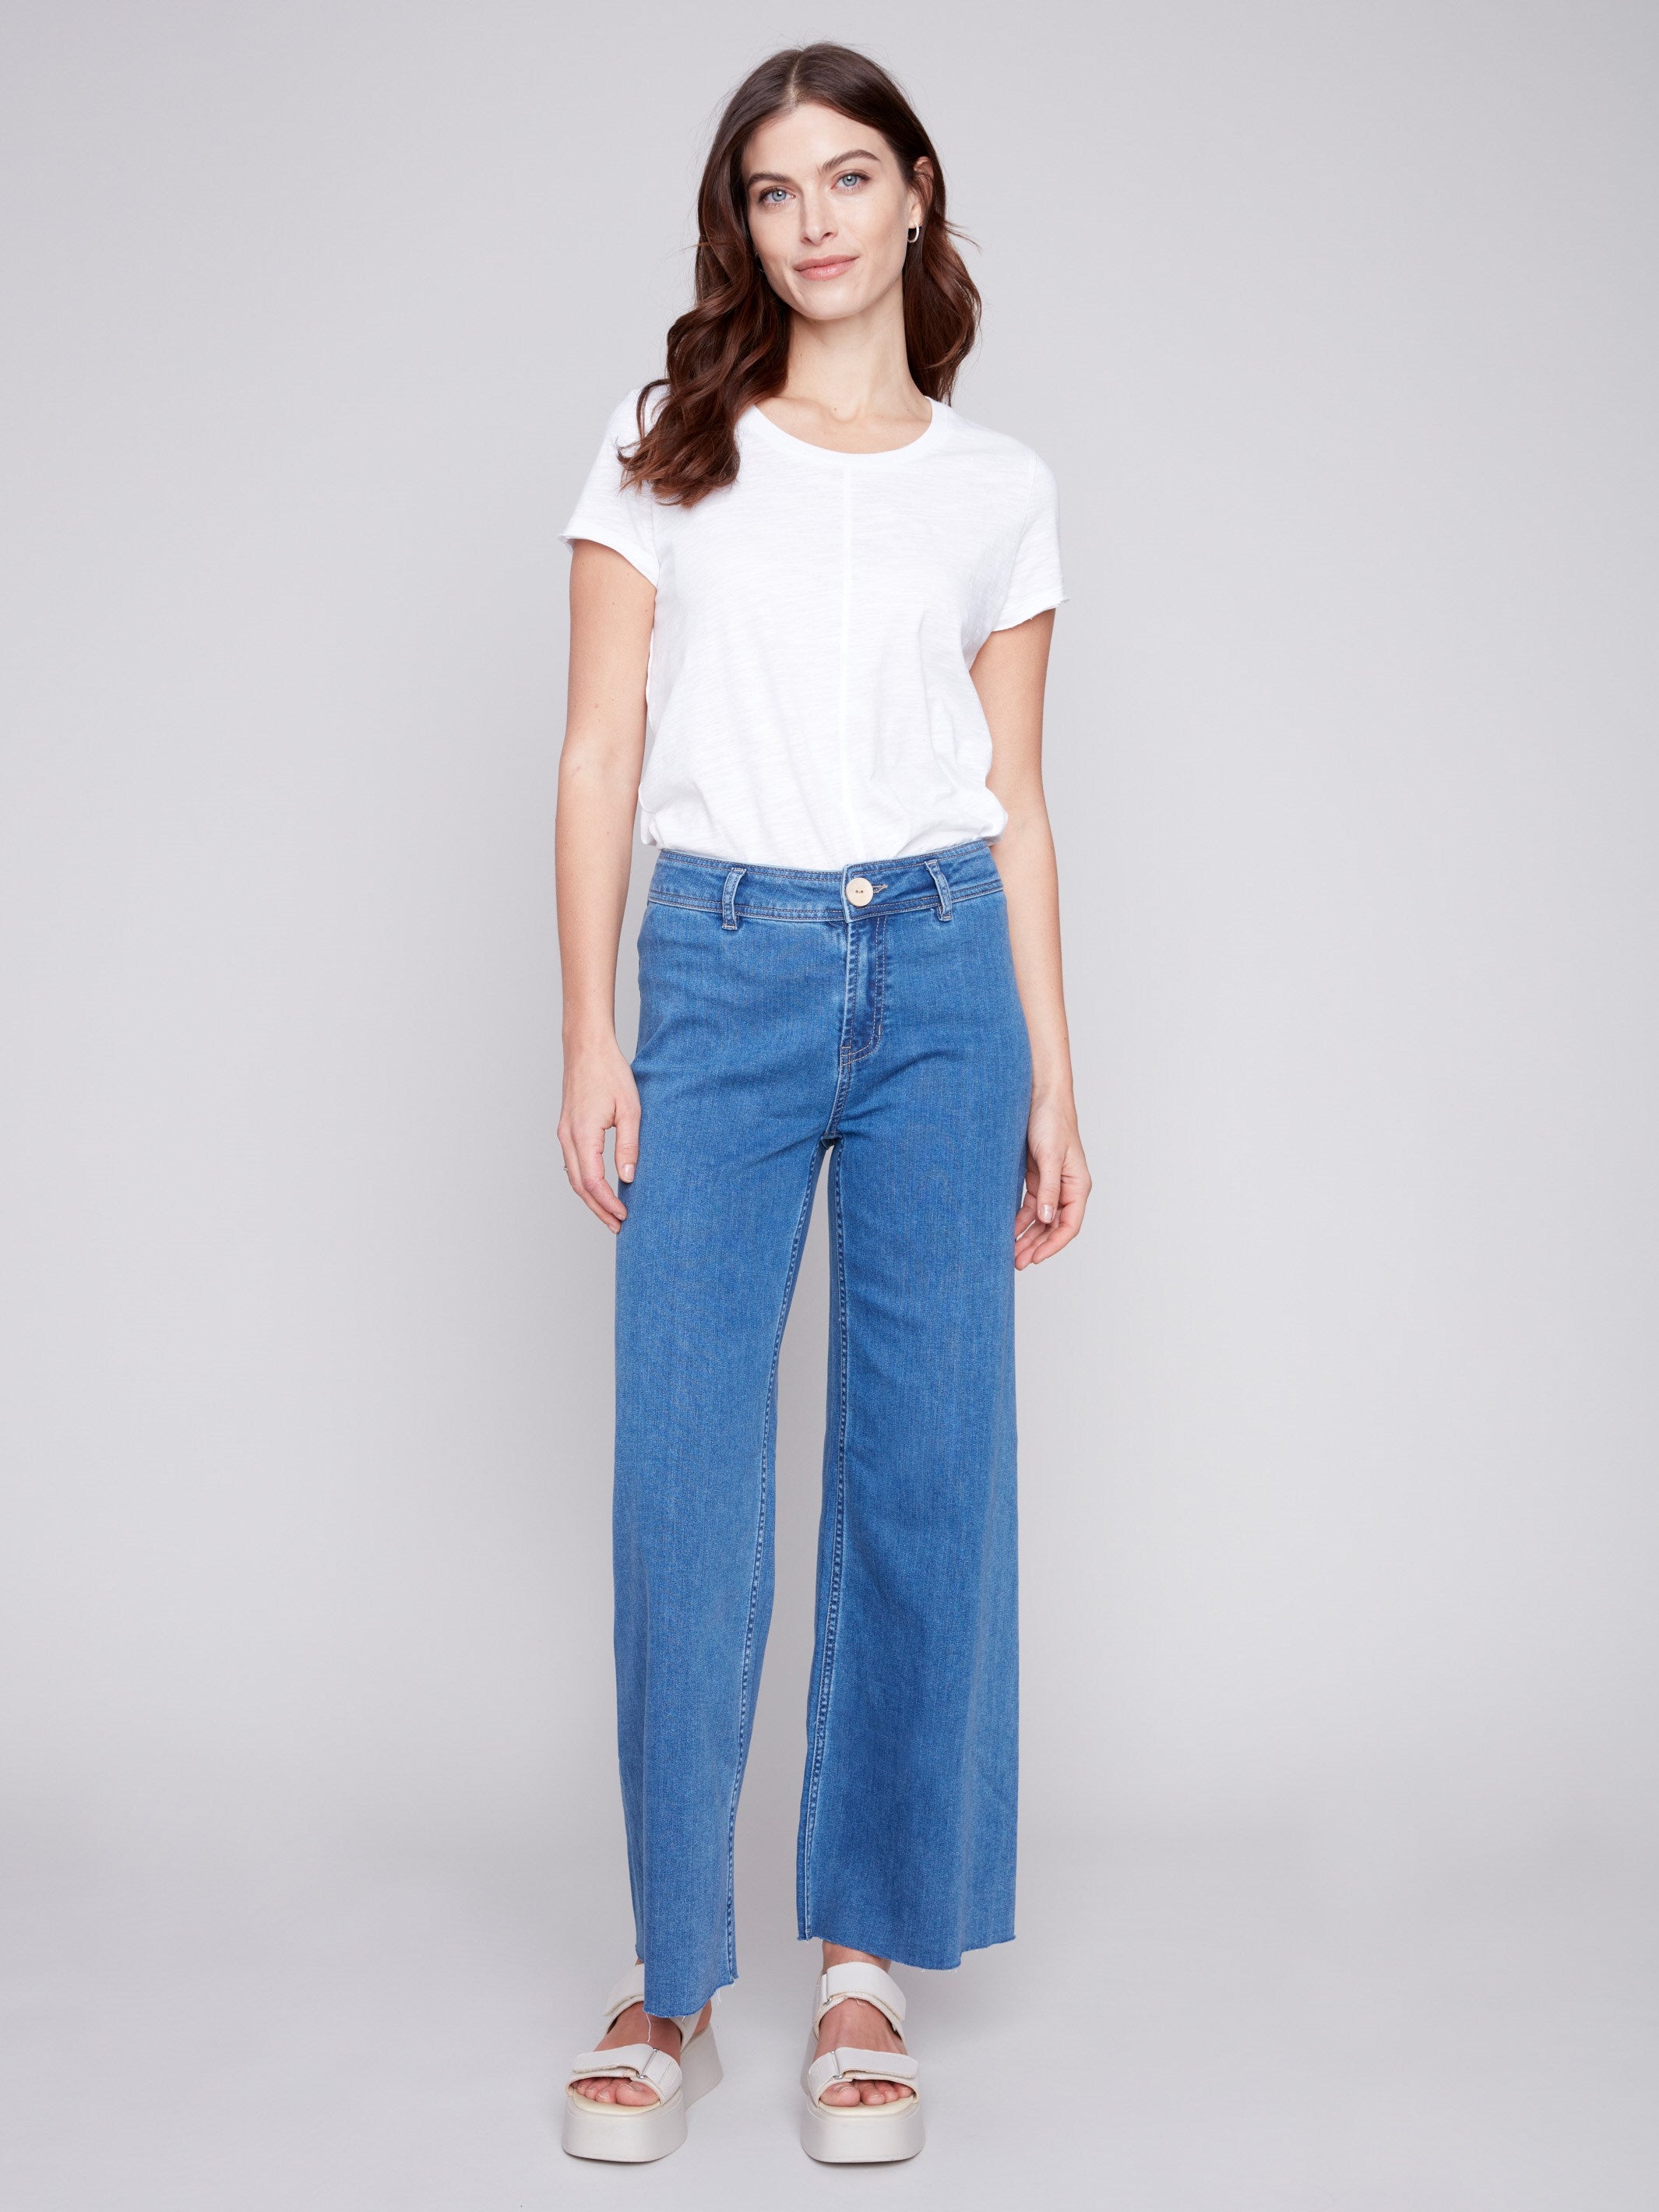 Wide Leg Jeans with Raw Hem - Medium Blue - Charlie B Collection Canada - Image 4